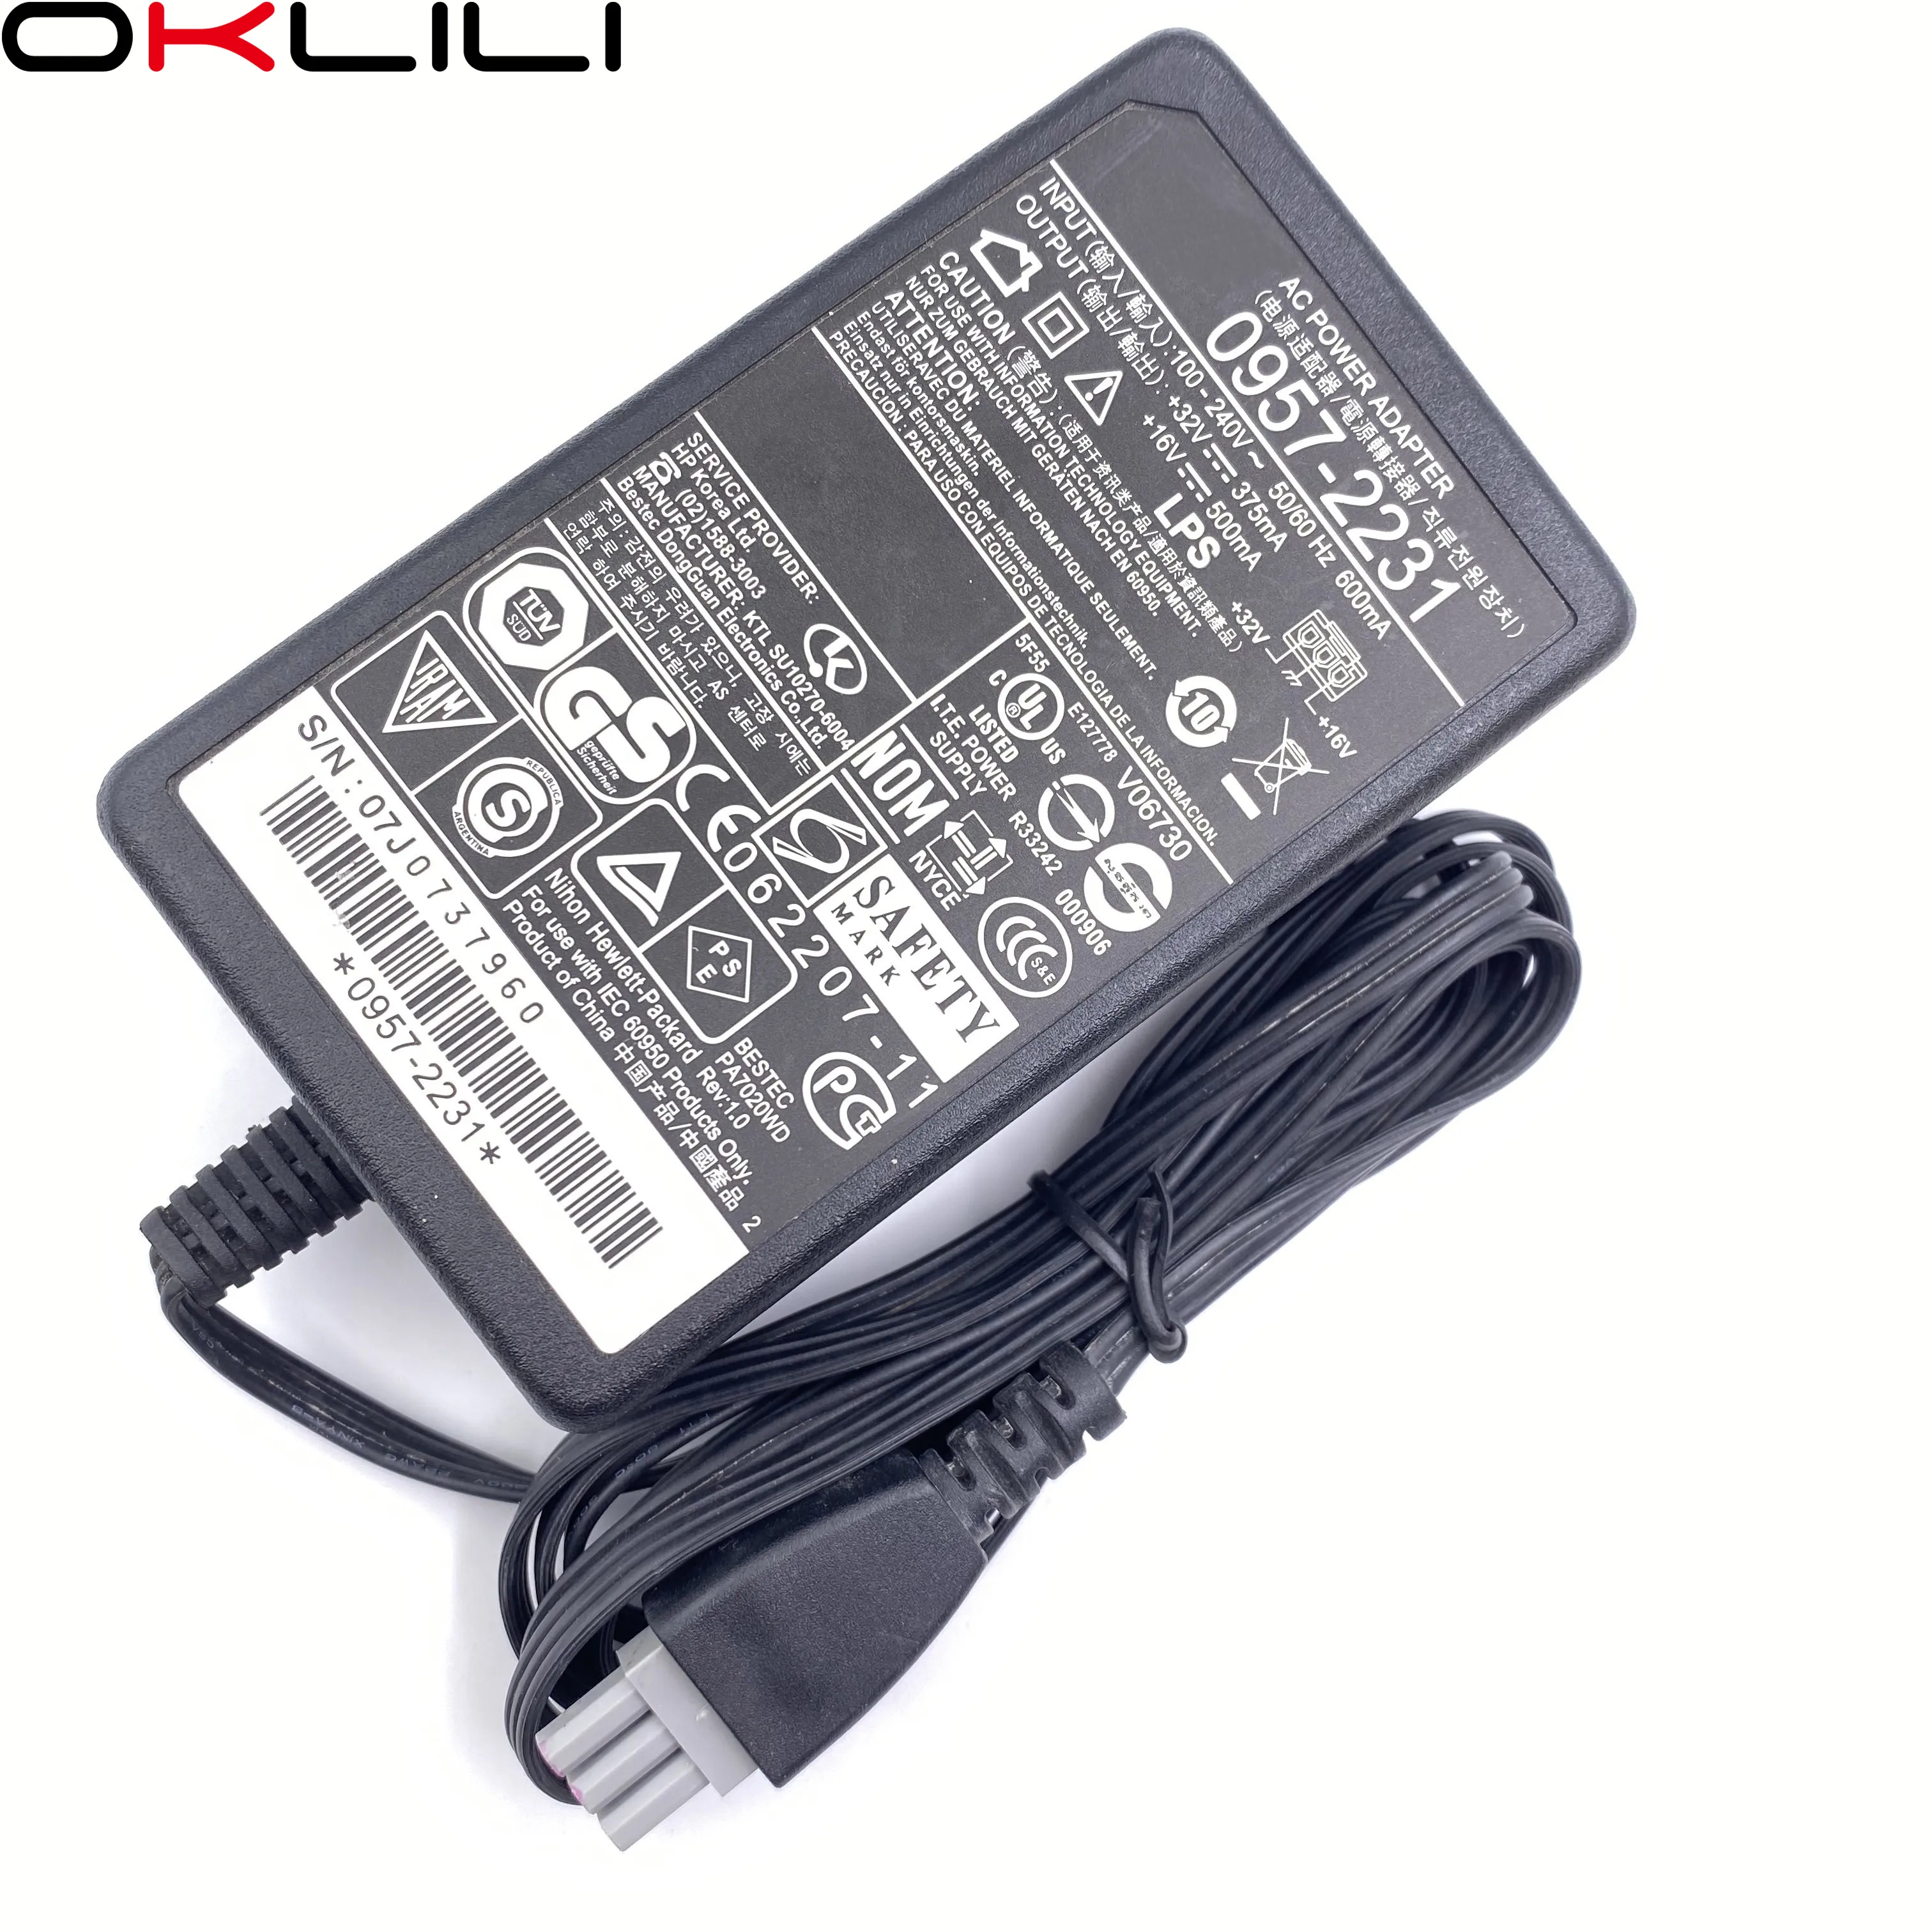 0957-2231 AC Adapter Charger Power Supply 32V 375mA 16V 500mA for HP D1420  D1430 D1460 D2430 D2460 F2120 F2140 F2240 F2280 F2290